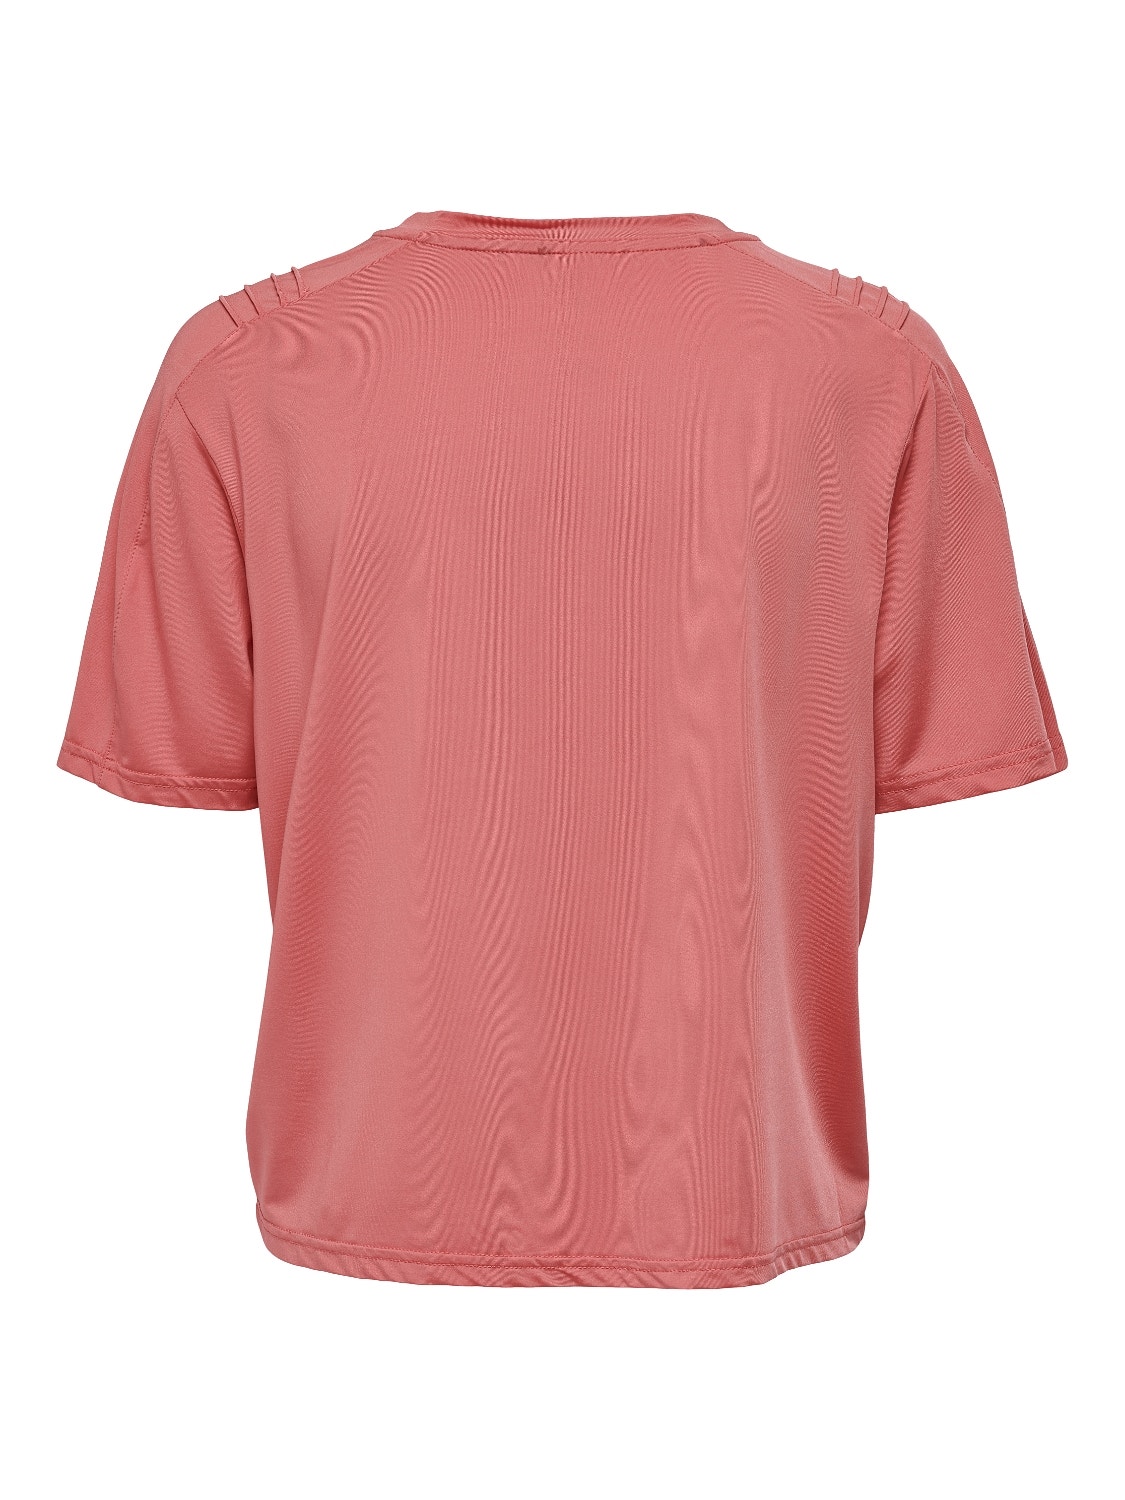 ONLY Kurzes Trainingsshirt -Spiced Coral - 15244332